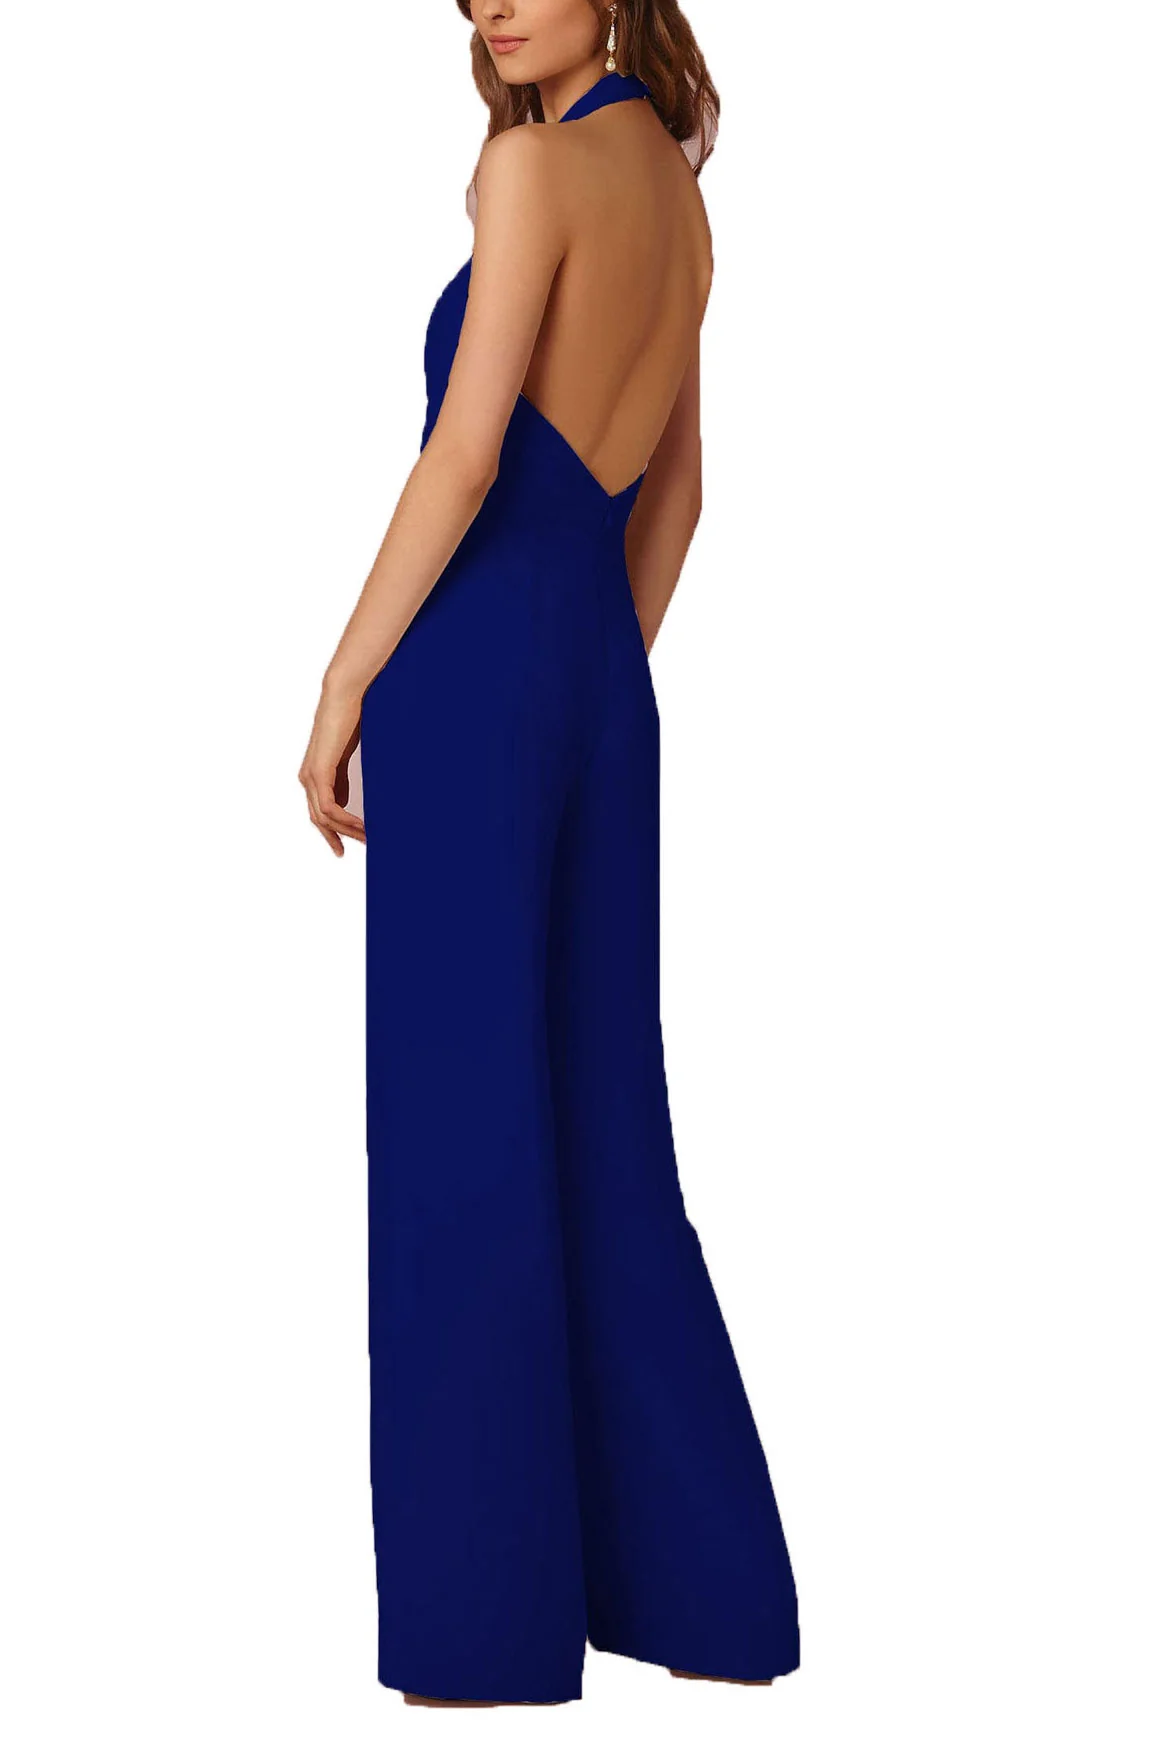 Casual Solid Color V-neck Sleeveless Jumpsuit